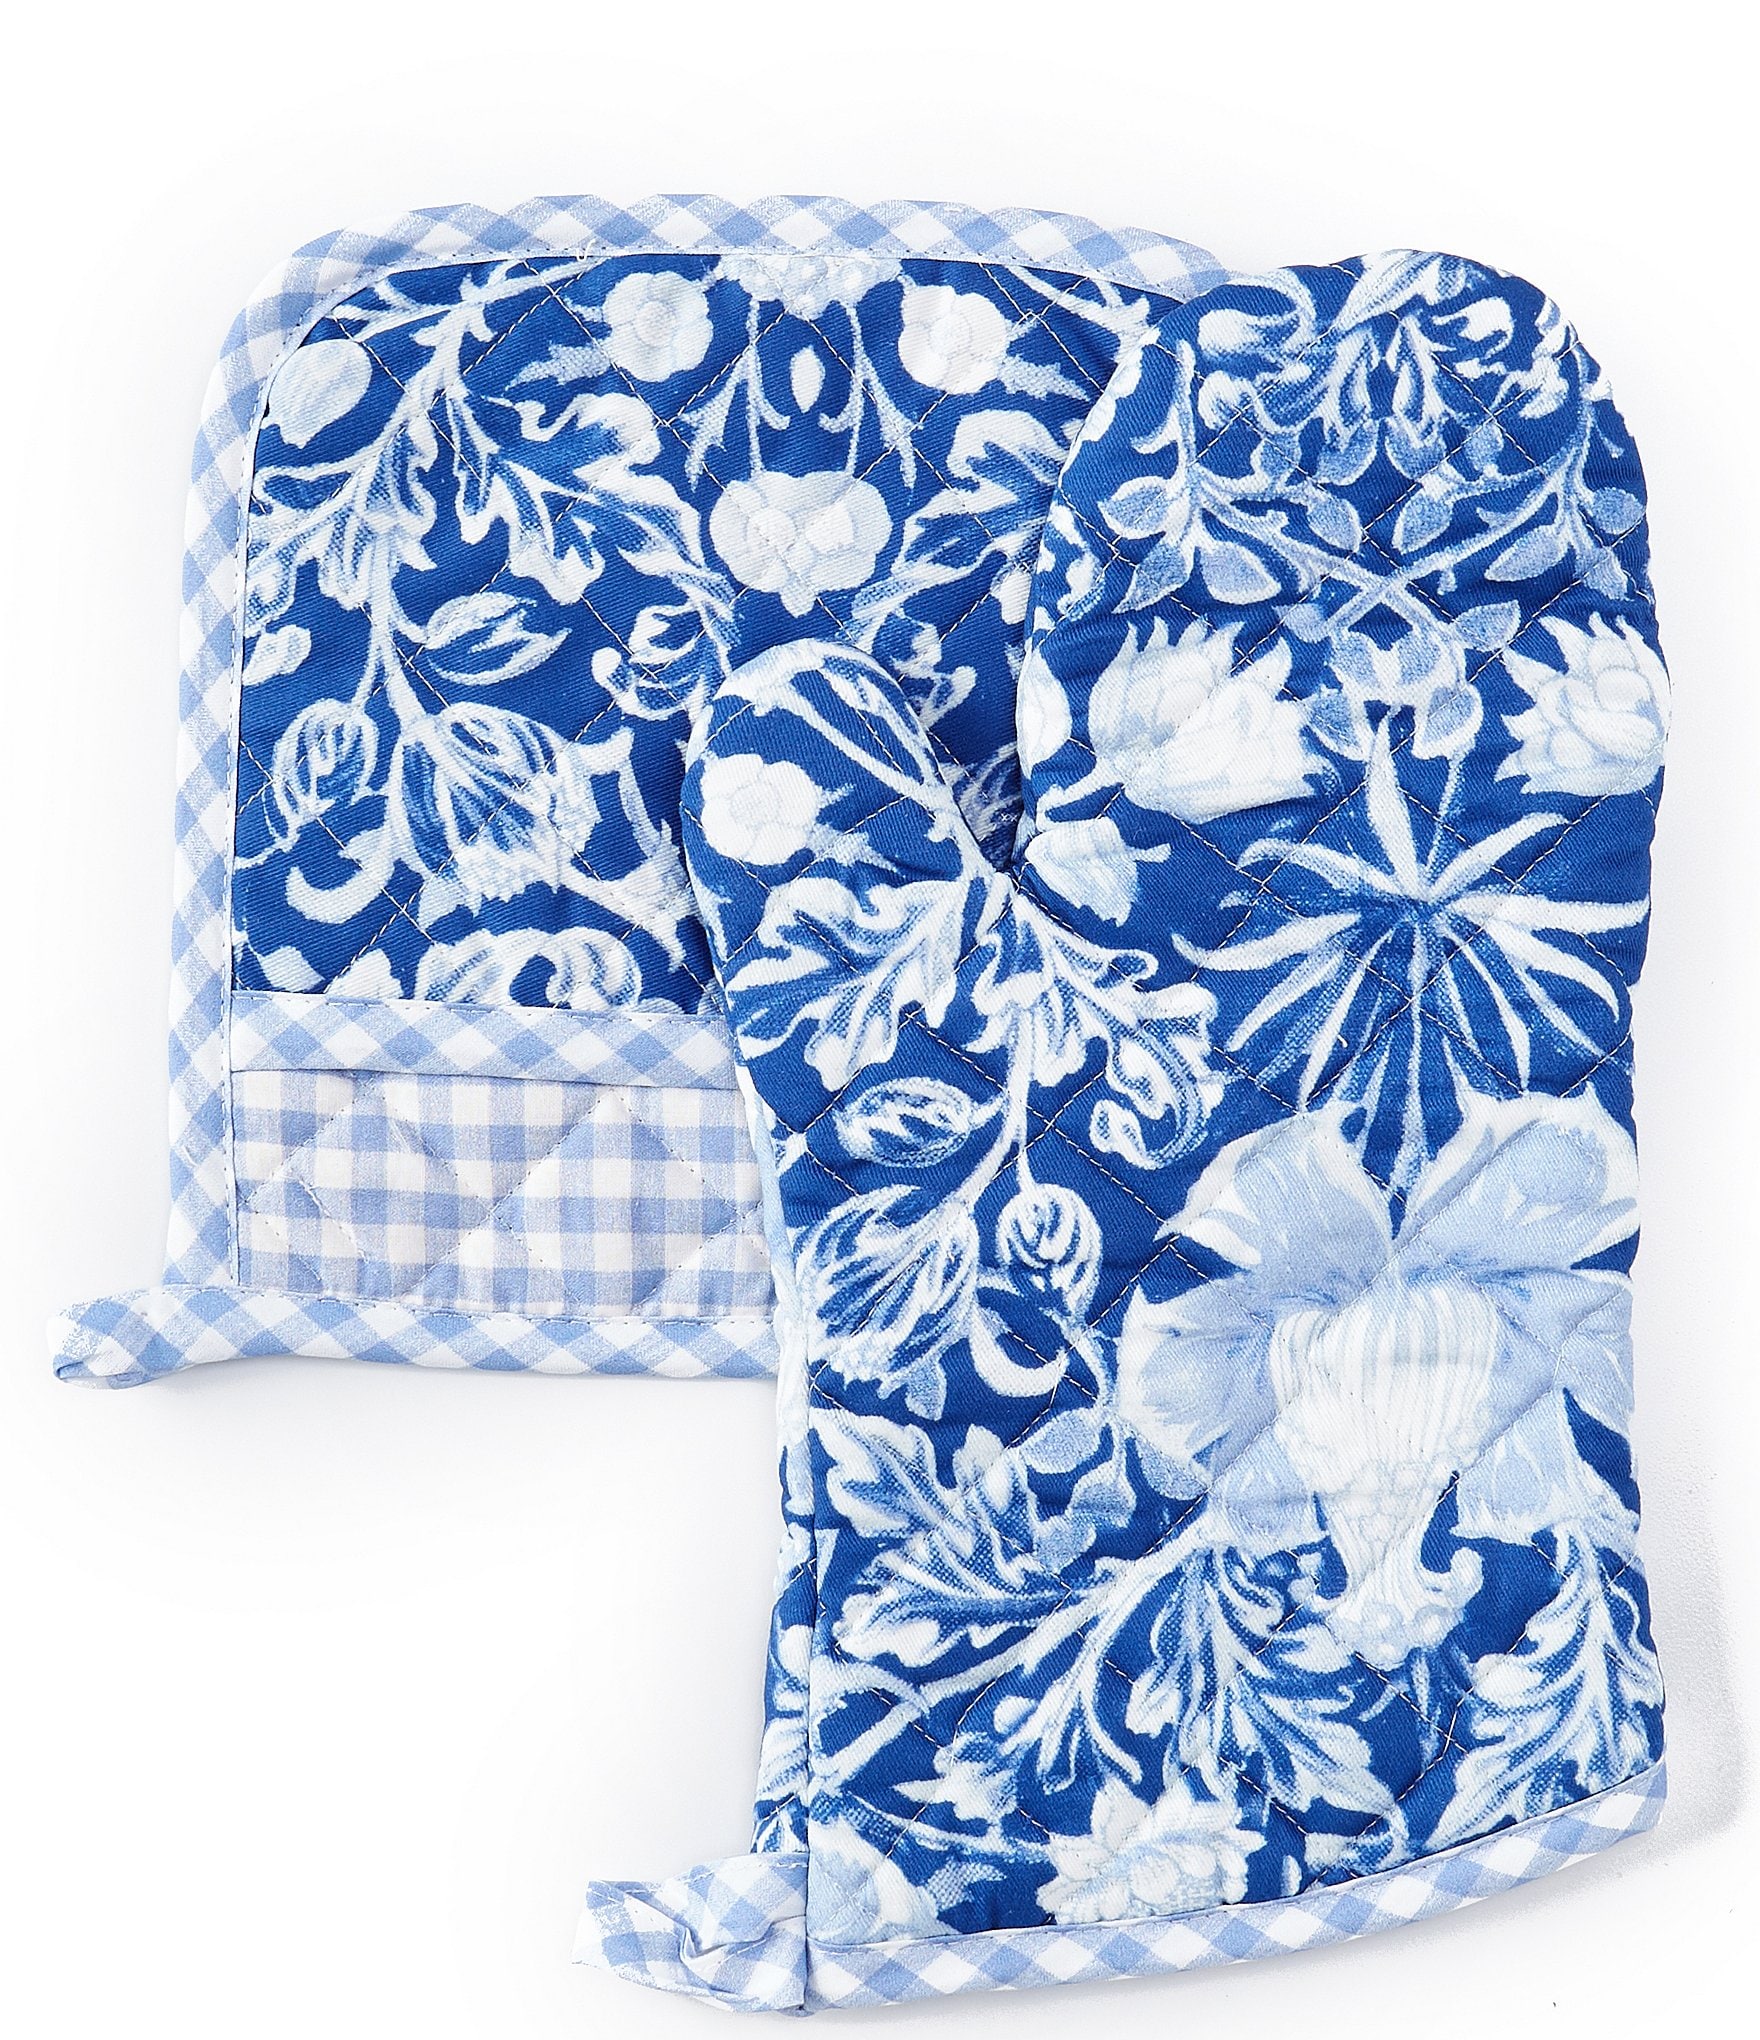 https://dimg.dillards.com/is/image/DillardsZoom/zoom/southern-living-chinoiserie-oven-mitt-and-pot-holder-set/00000000_zi_20297225.jpg